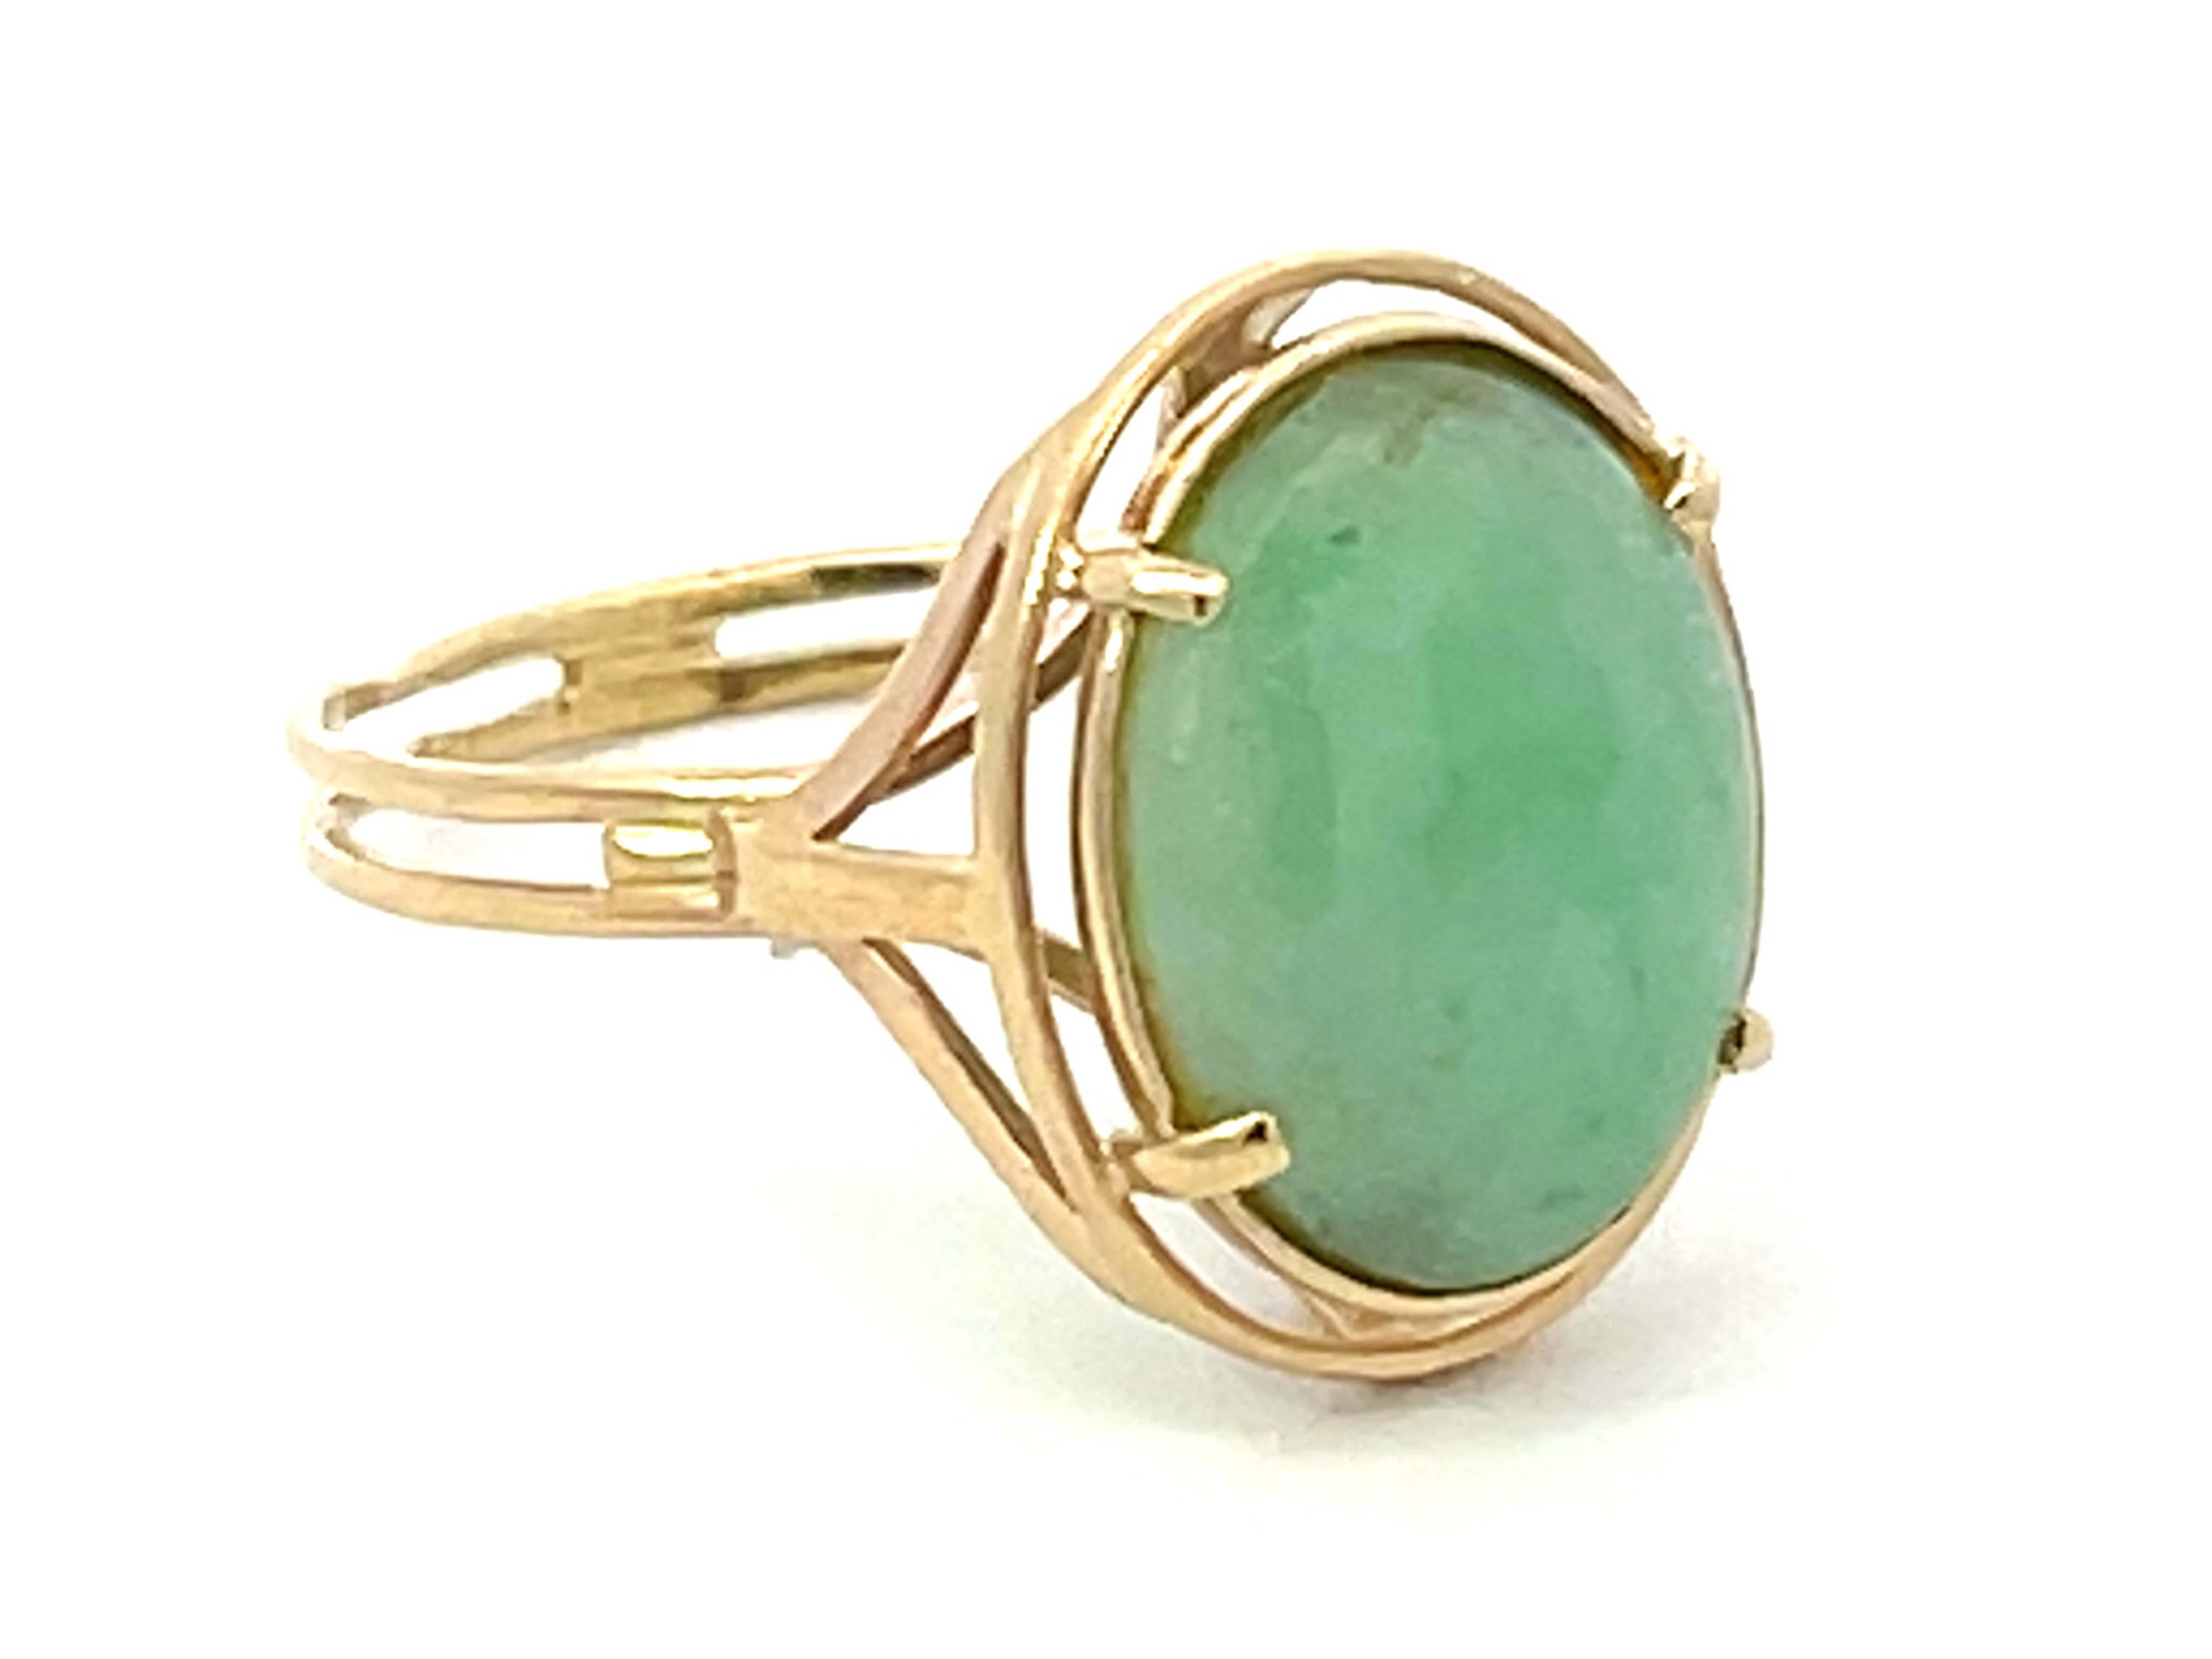 Modern Mings Oval Green Cabochon Jade Ring 14k Yellow Gold